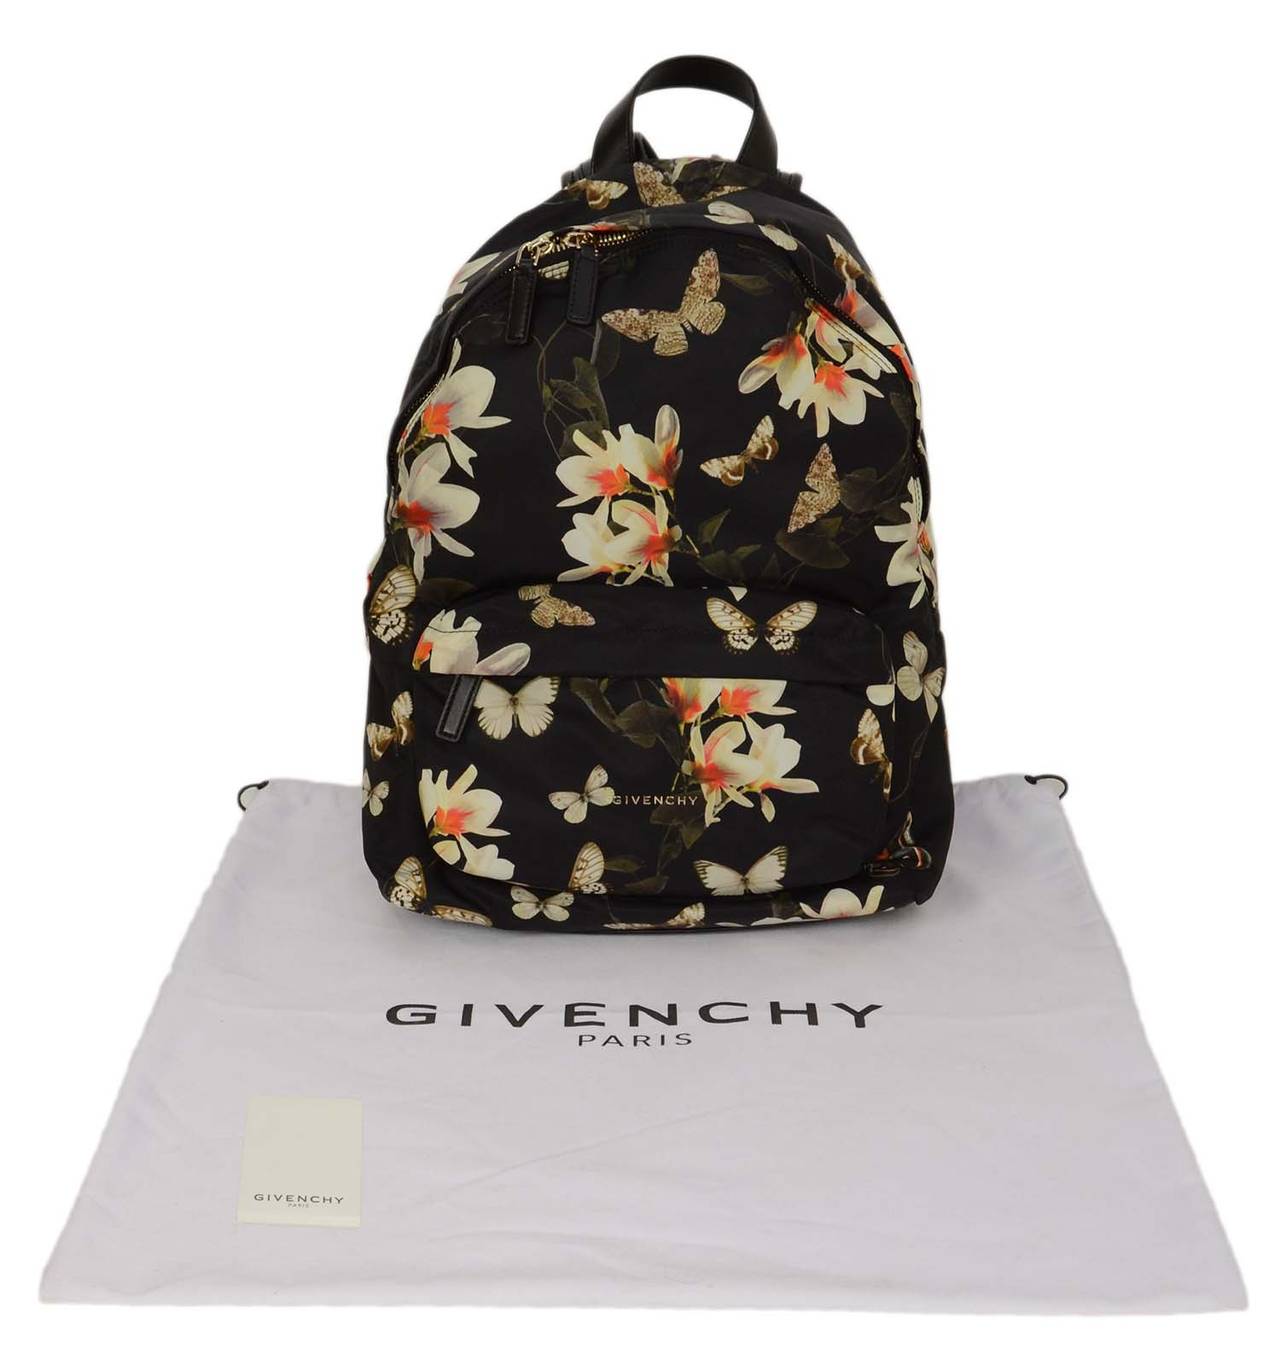 GIVENCHY Floral & Butterfly Print Black Nylon Backpack rt $1, 320 2